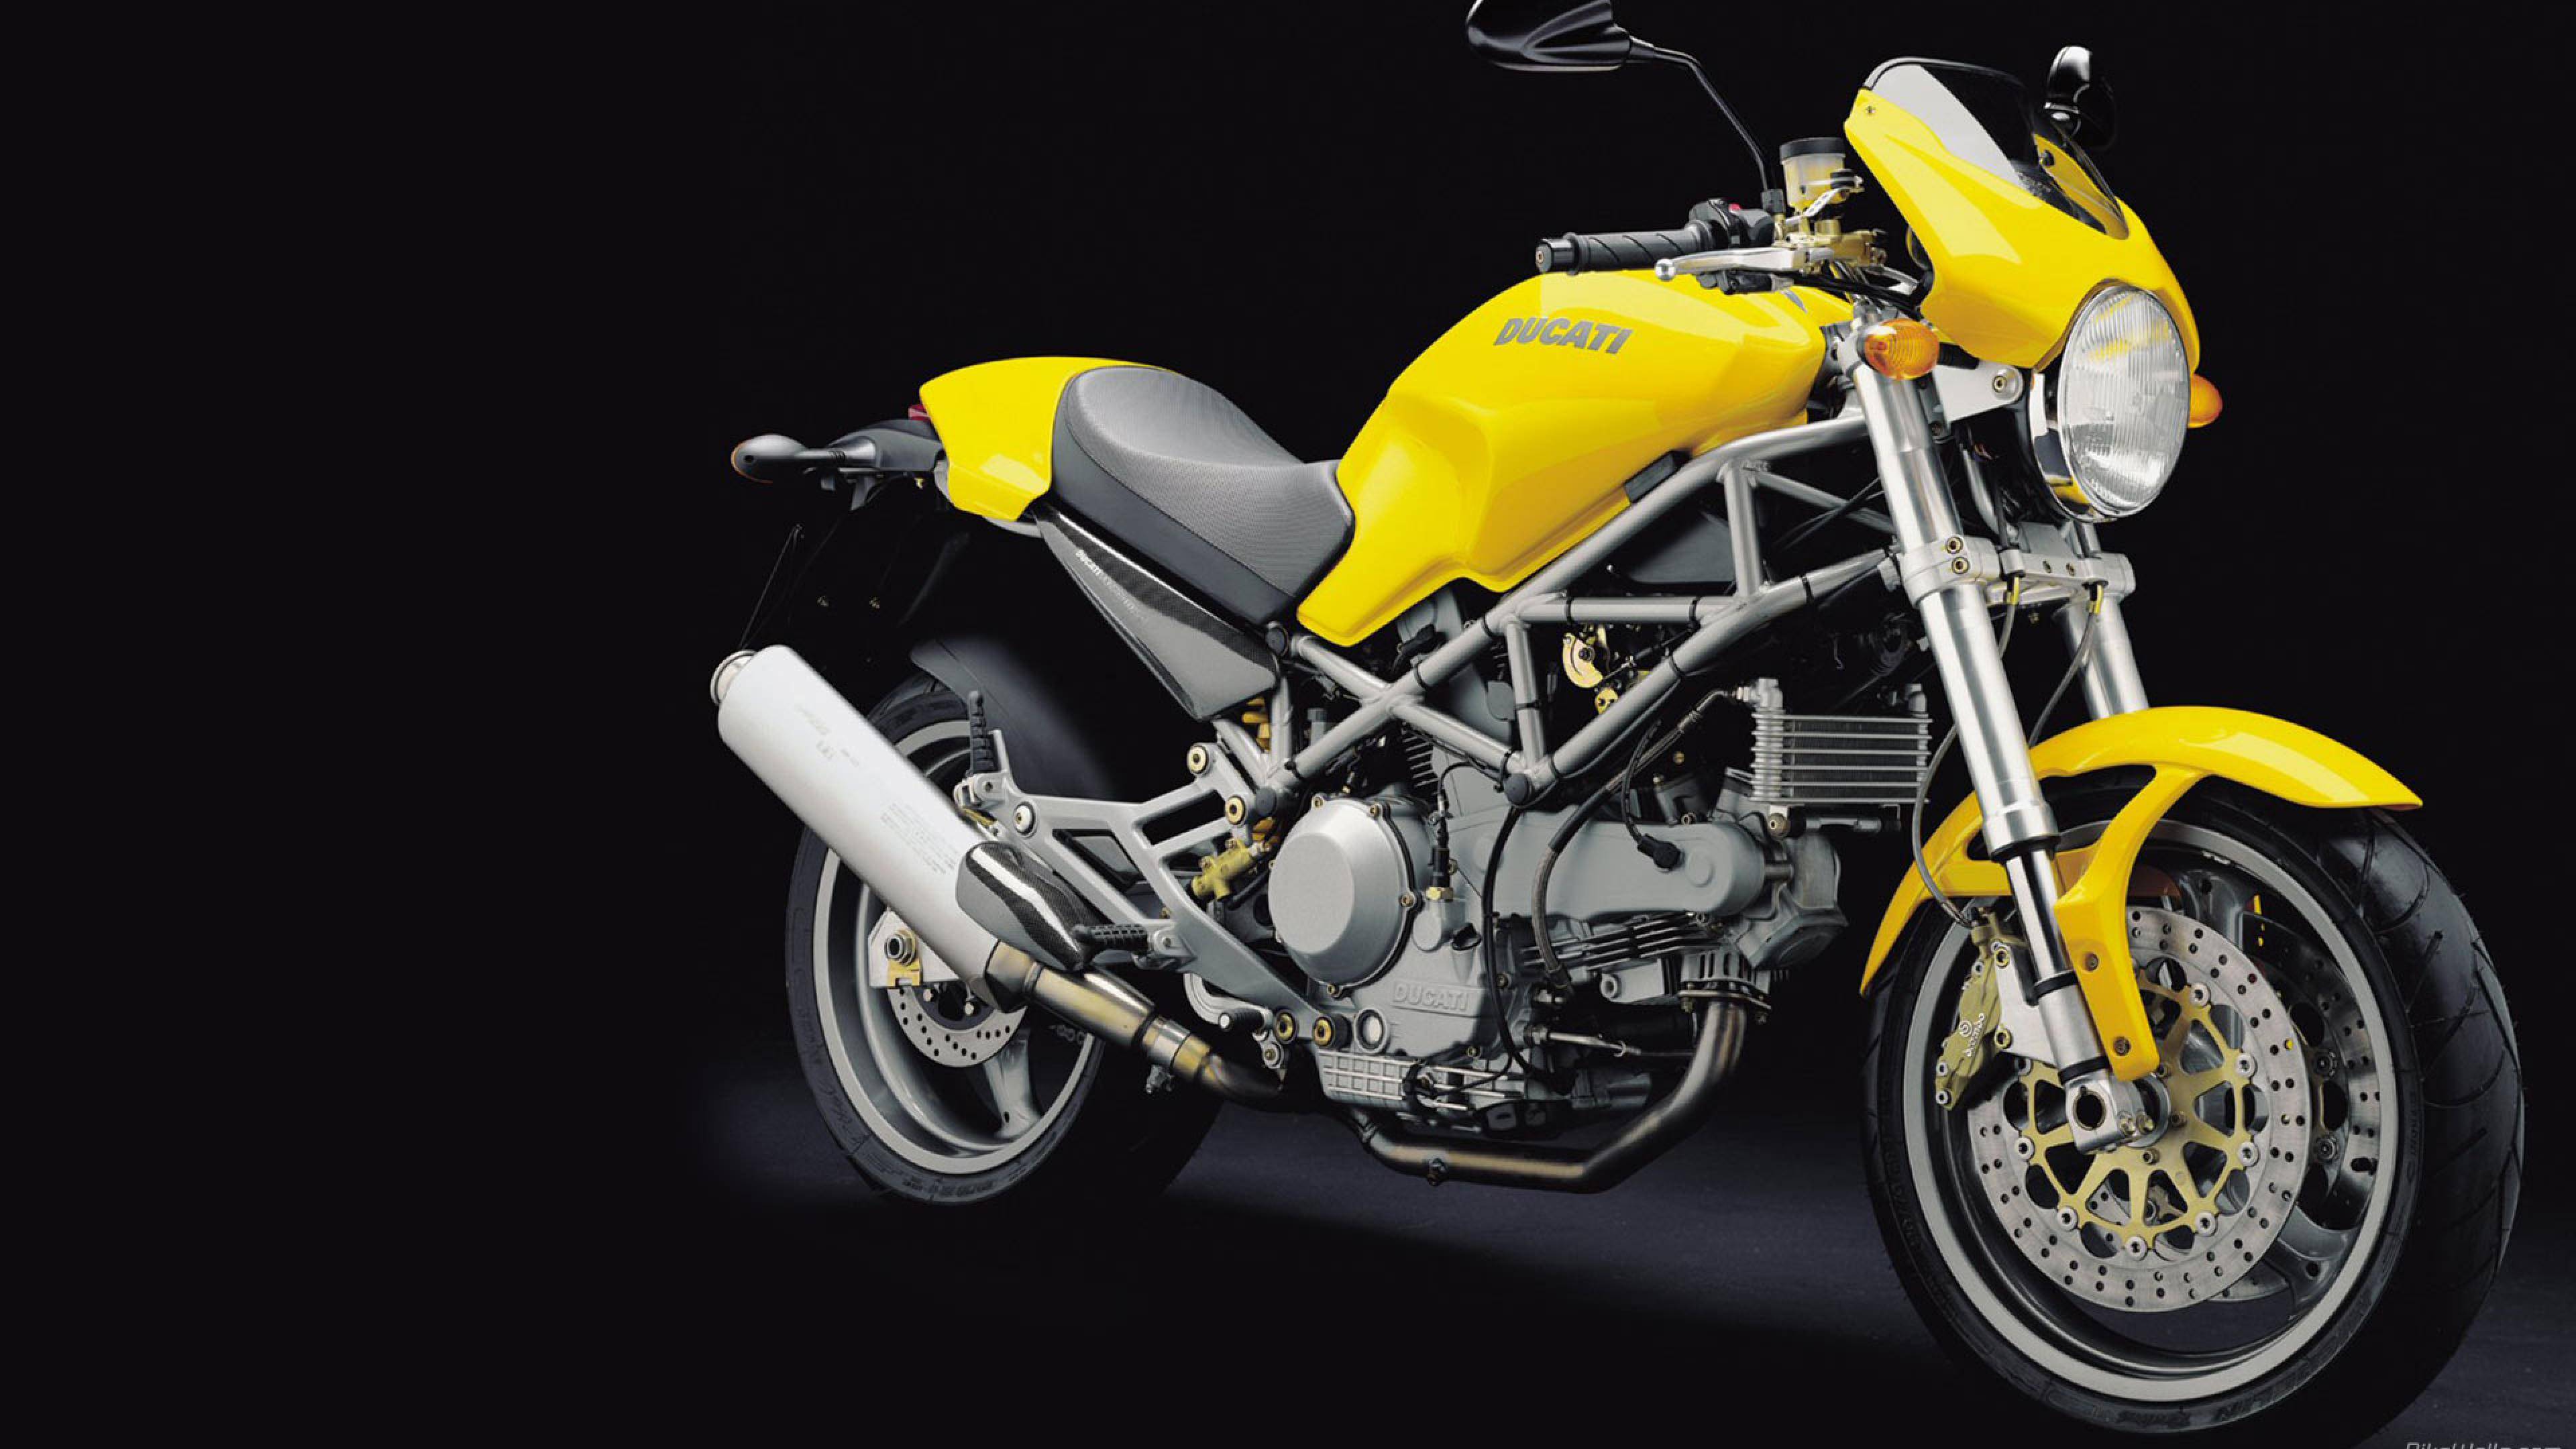 Ducati monster - abcdef.wiki